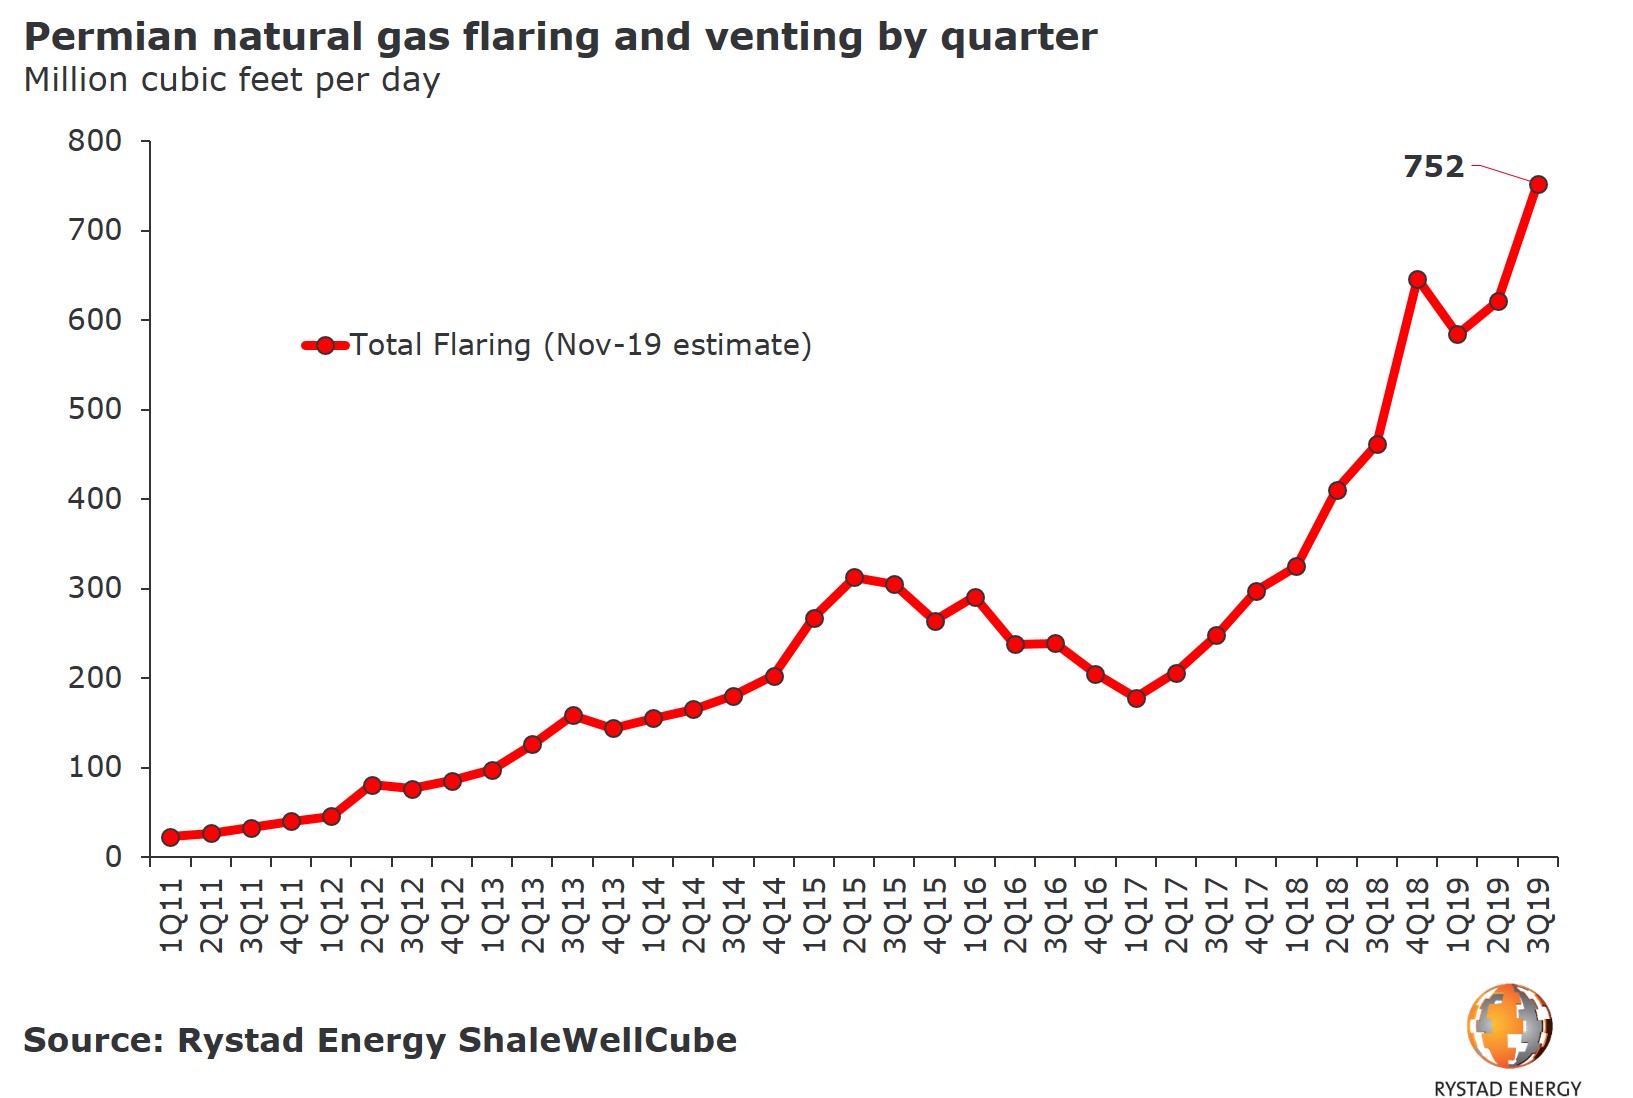 20191105_PR Chart Permian nat gas flaring and venting 2011 2019 by quarter.jpg